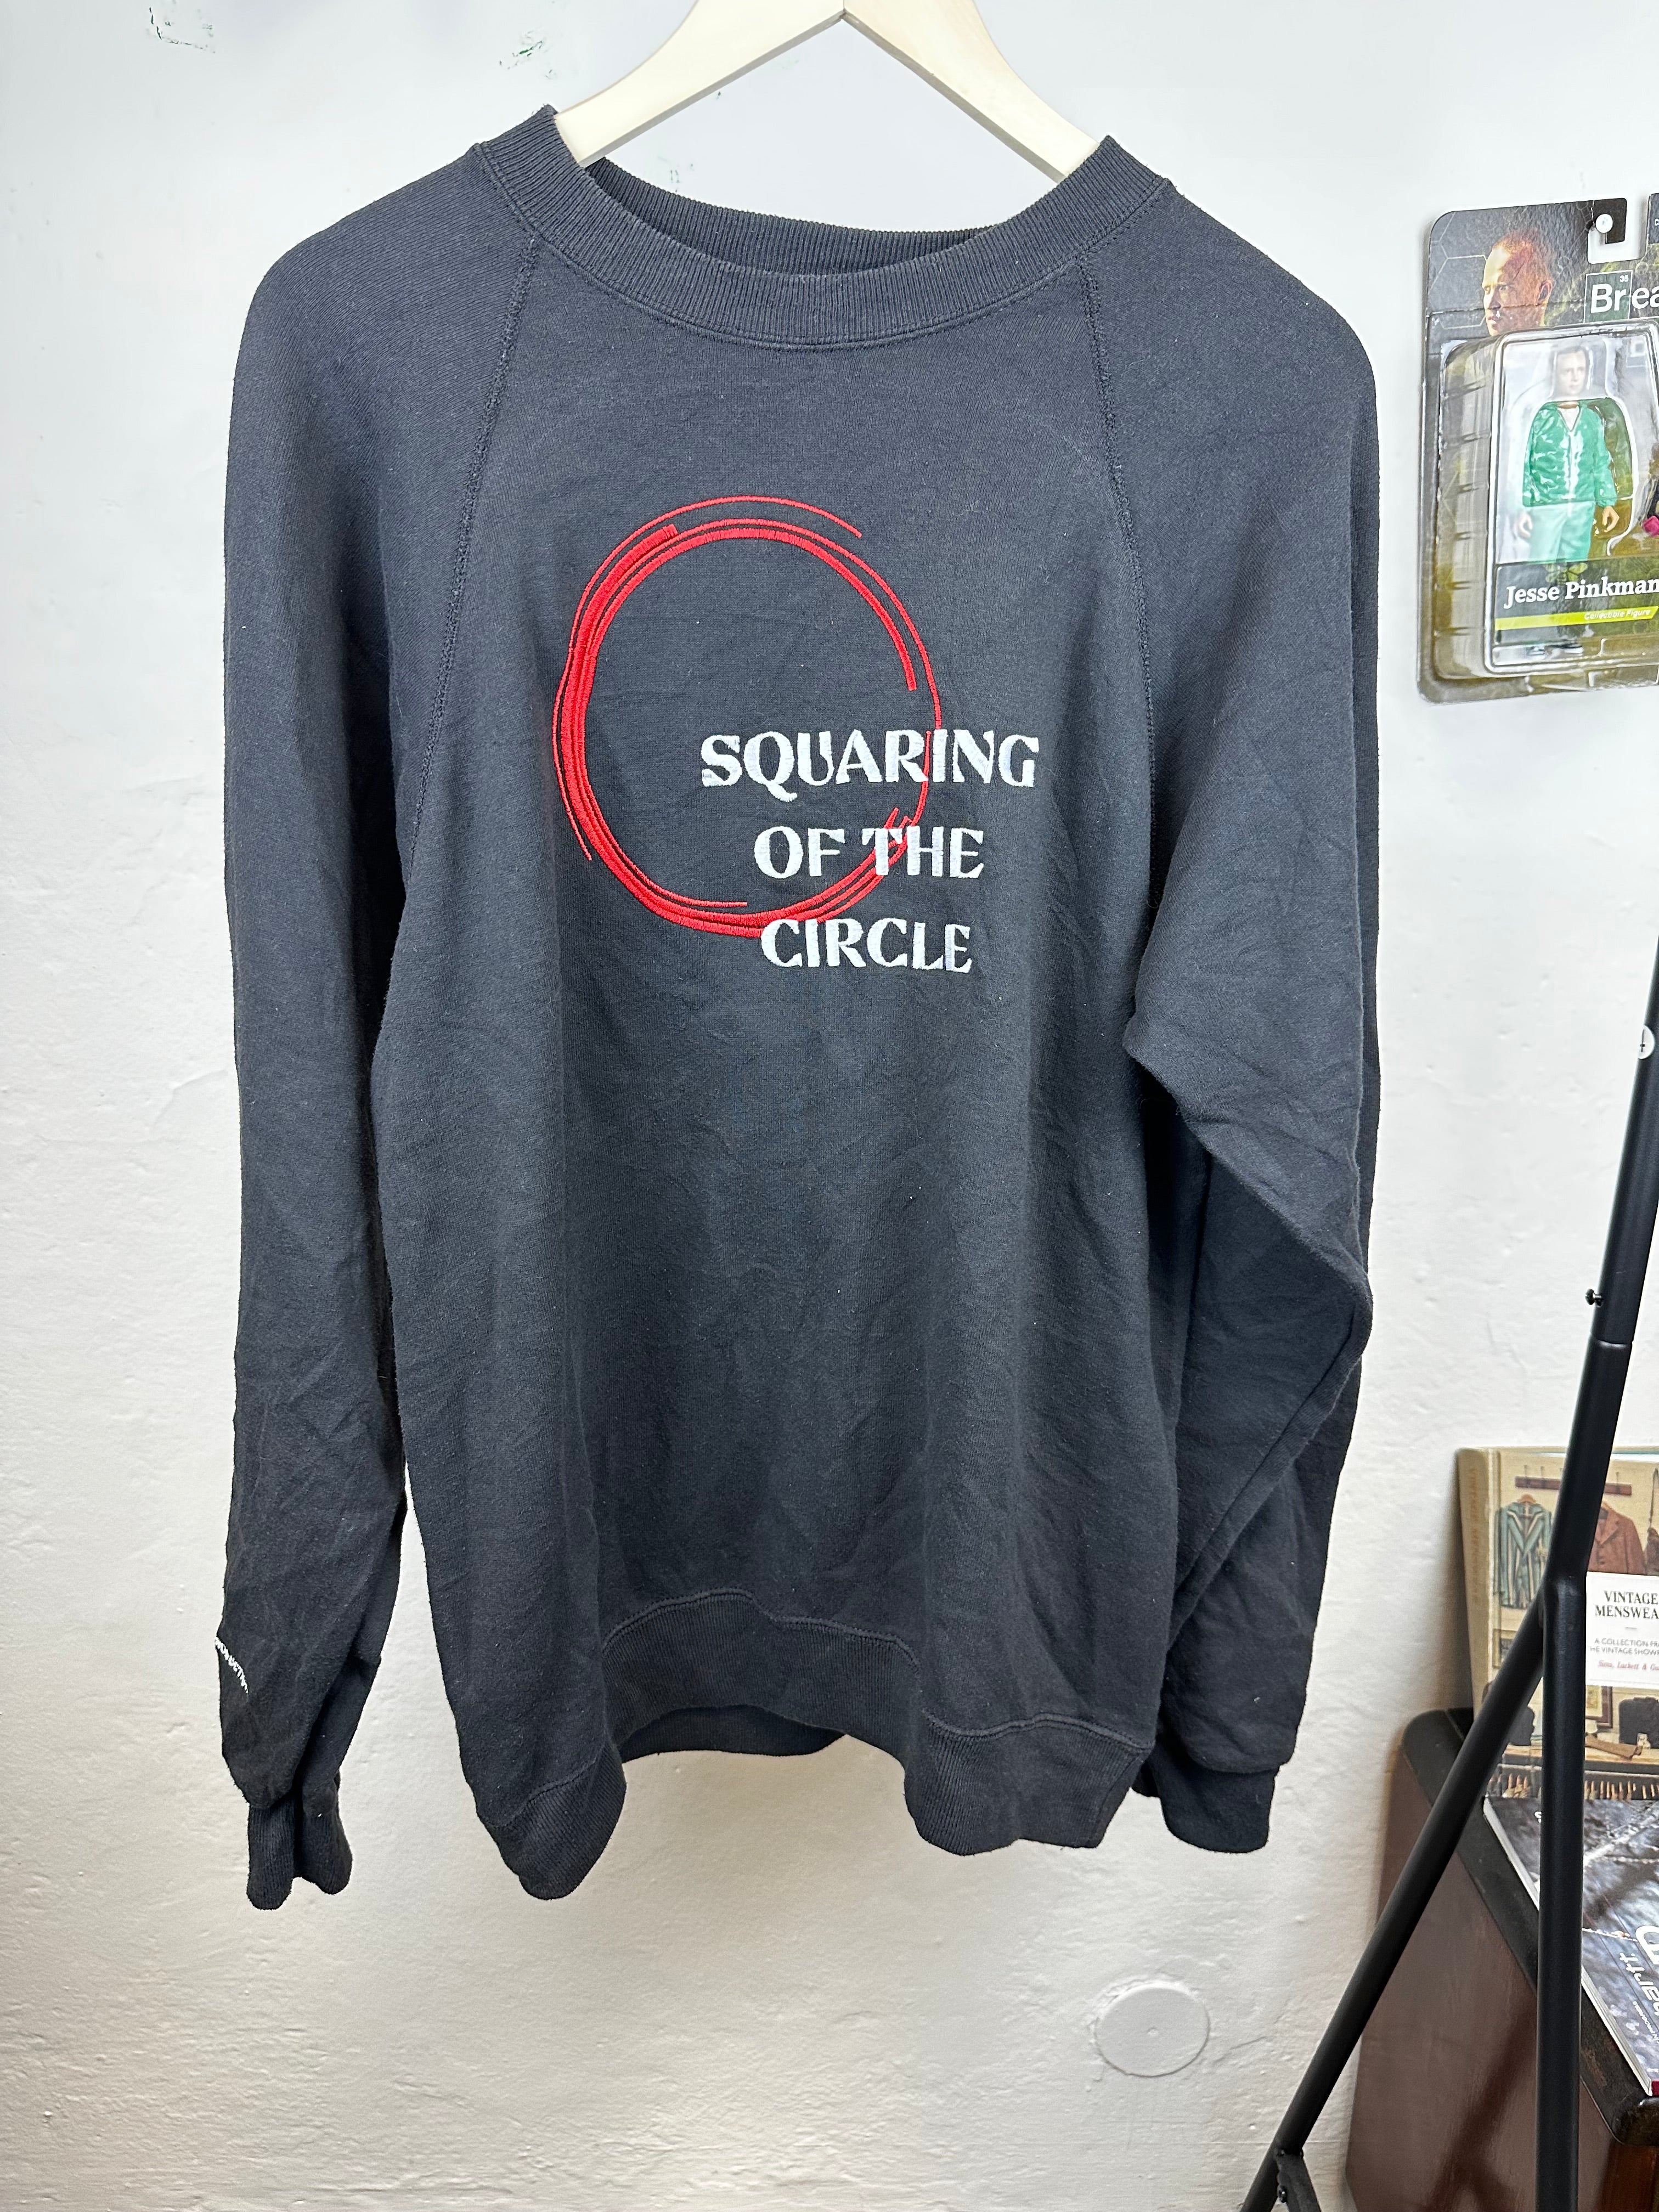 No Introductions - "Squaring of the Circle" crewneck - size L